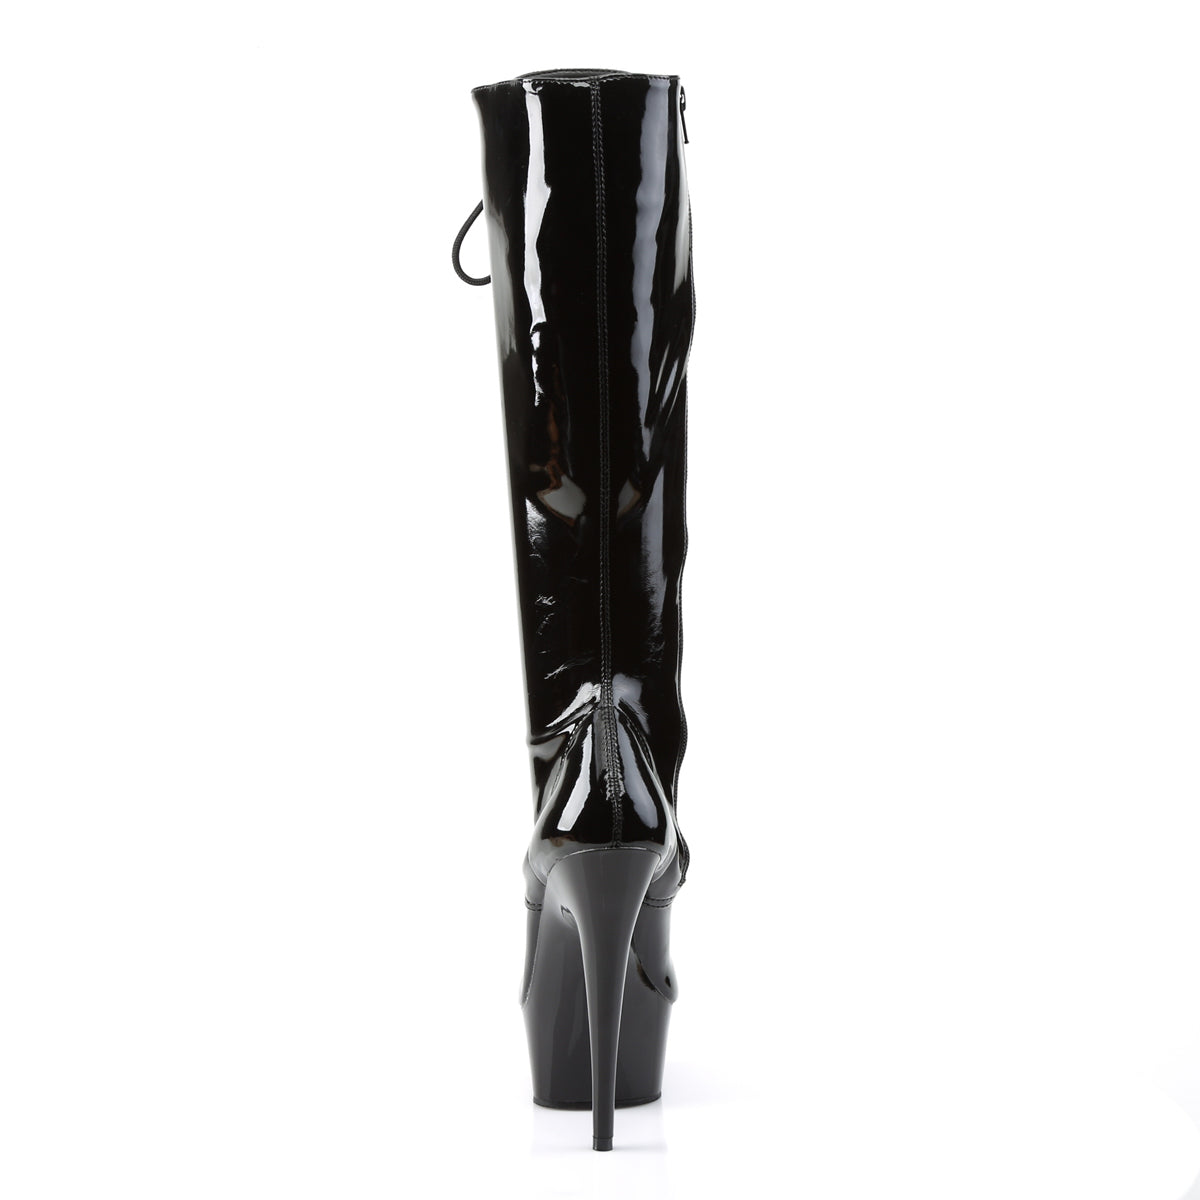 DELIGHT-2023 6" Heel Black Stretch Patent Pole Dancer Boots-Pleaser- Sexy Shoes Fetish Footwear